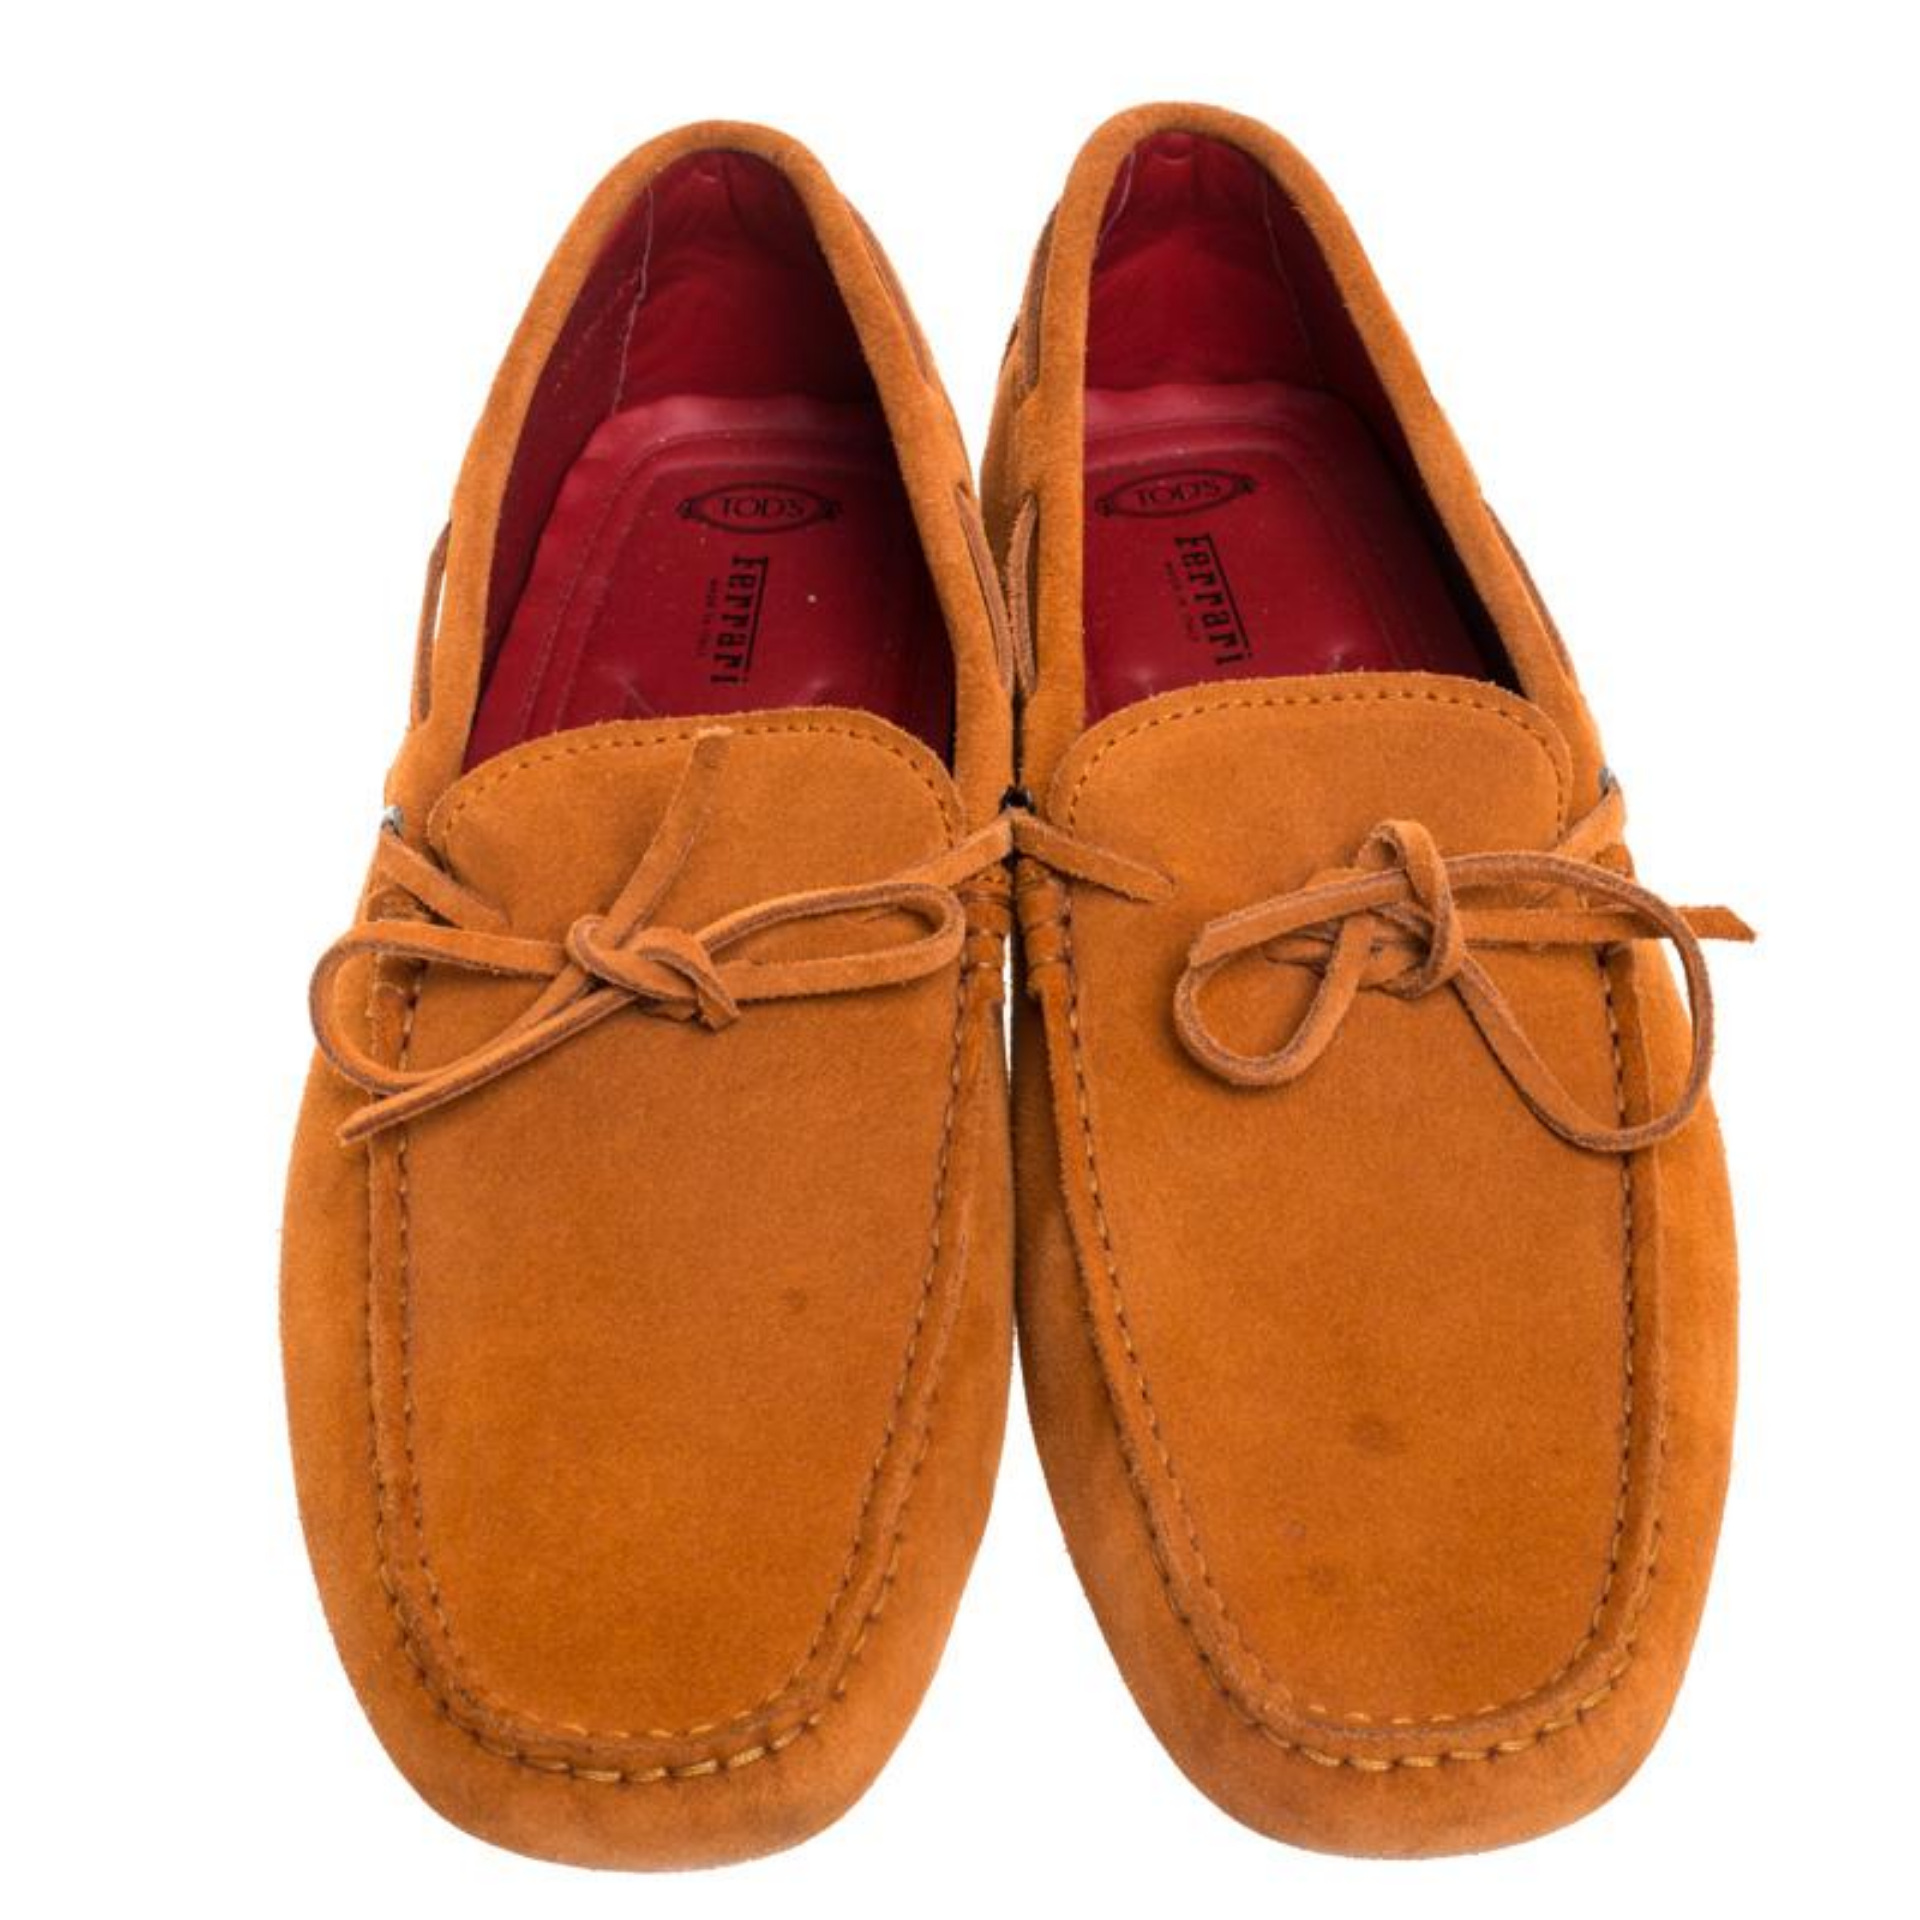 Tod's For Ferrari Orange Suede Bow Moccasins Size 42